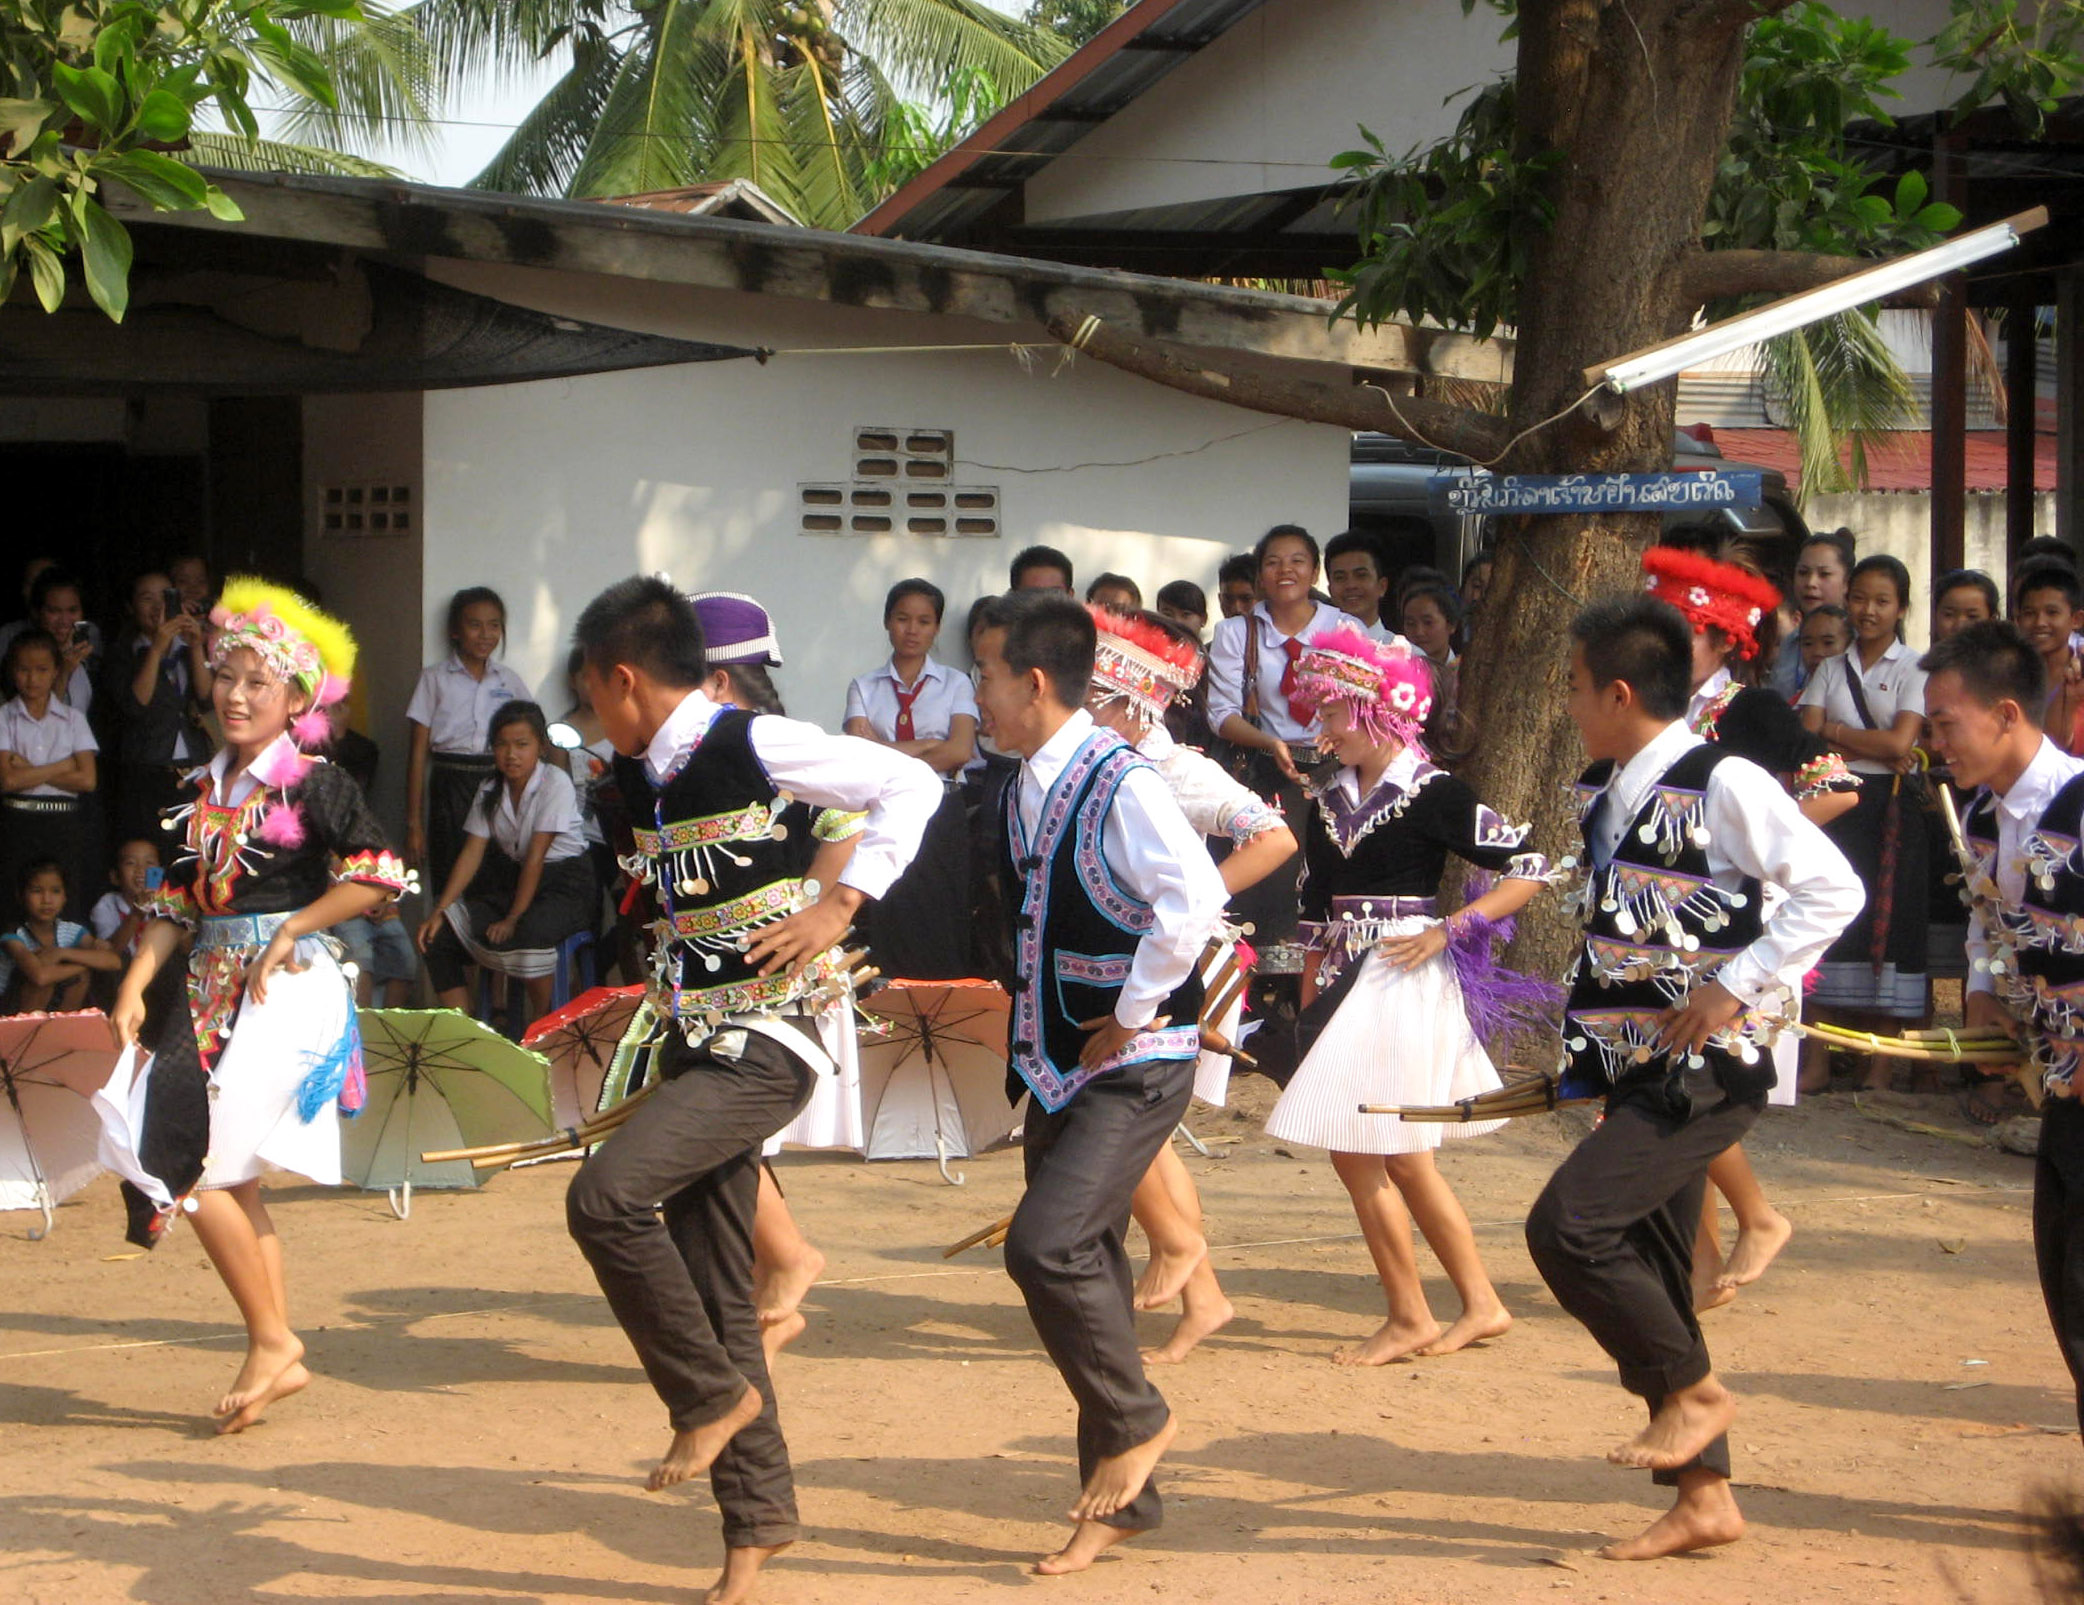 Hmong customs and culture